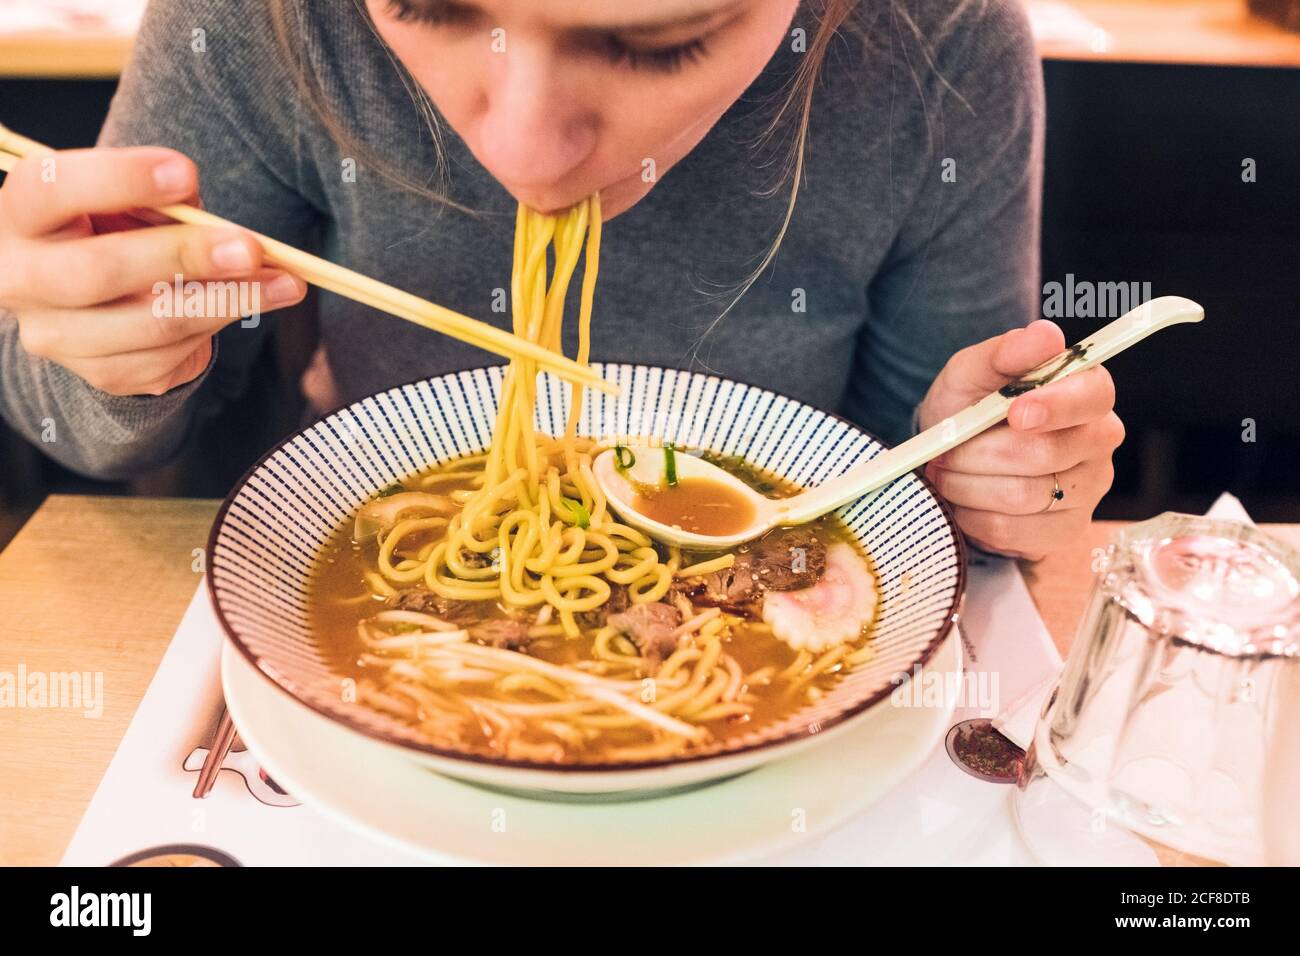 https://c8.alamy.com/comp/2CF8DTB/young-female-using-chopsticks-and-spoon-to-eat-tasty-ramen-while-sitting-at-table-in-japanese-restaurant-2CF8DTB.jpg